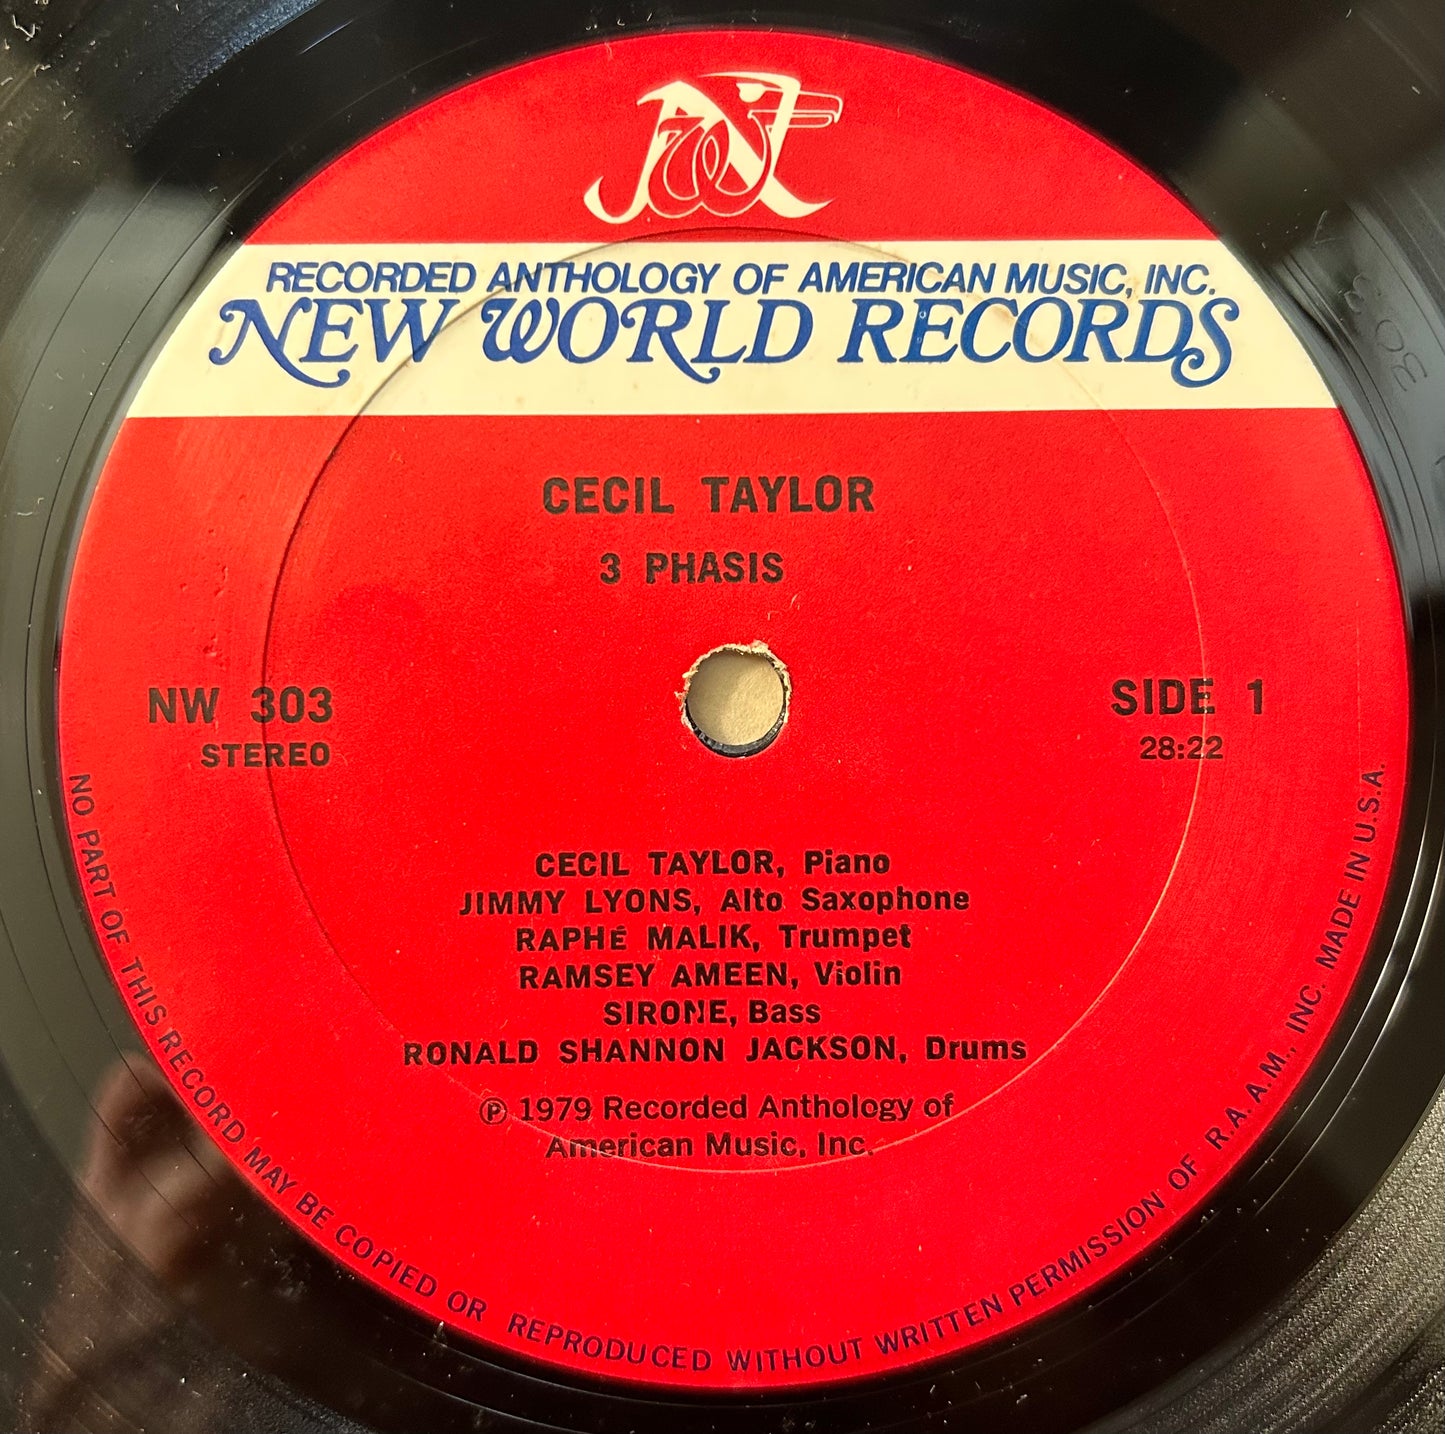 Cecil Taylor - 3 Phasis 1979 New World Records Free Jazz